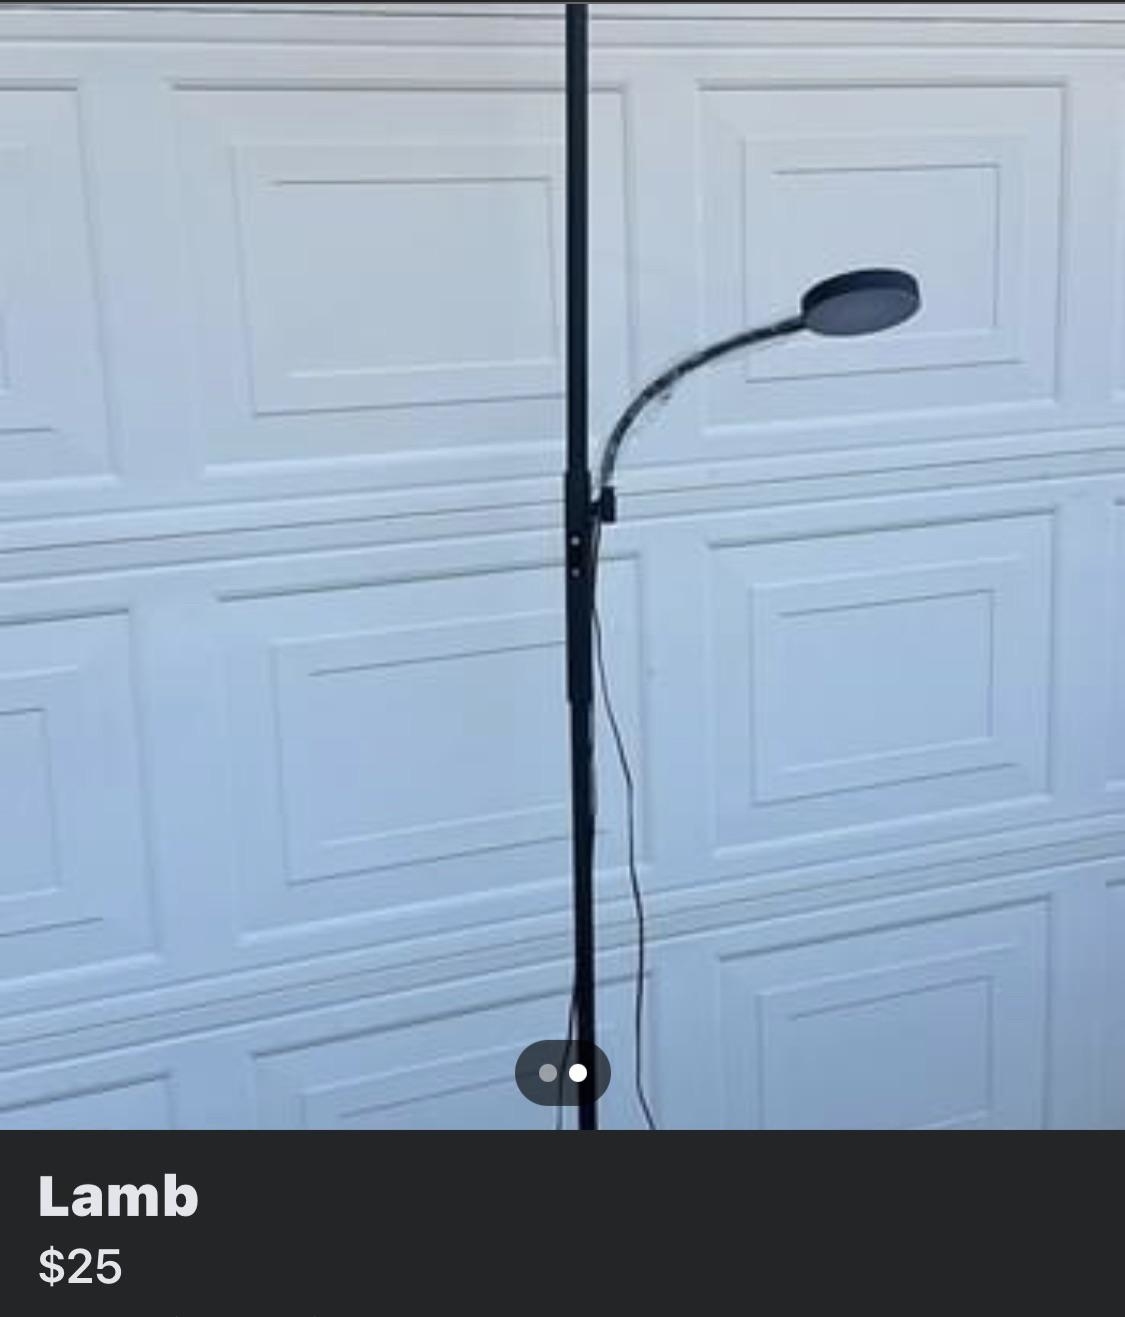 Floor lamp with a curved design for sale in front of a garage door, listed at $25